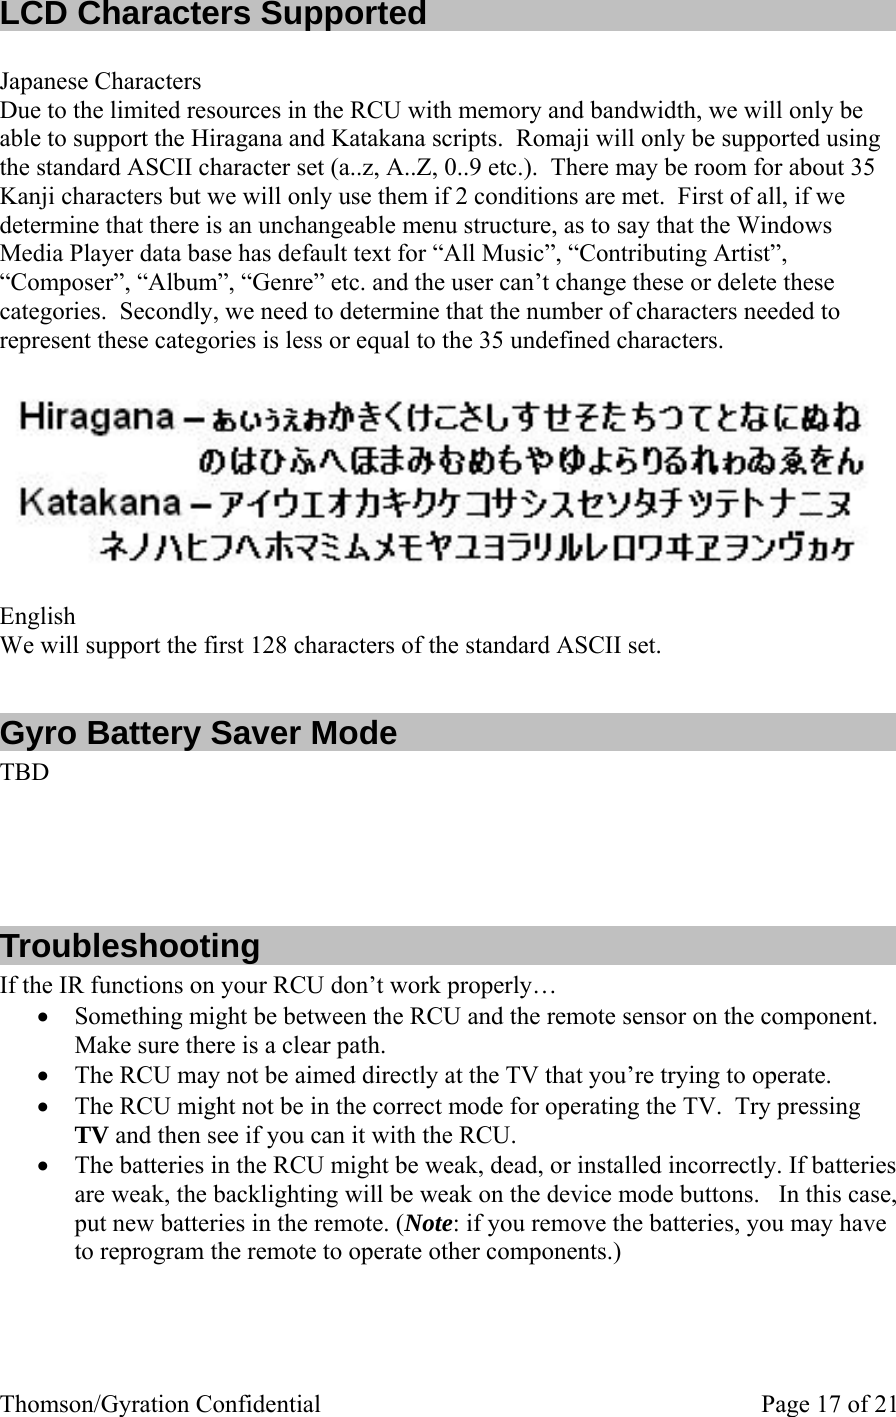 Thomson/Gyration Confidential    Page 17 of 21 LCD Characters Supported  Japanese Characters Due to the limited resources in the RCU with memory and bandwidth, we will only be able to support the Hiragana and Katakana scripts.  Romaji will only be supported using the standard ASCII character set (a..z, A..Z, 0..9 etc.).  There may be room for about 35 Kanji characters but we will only use them if 2 conditions are met.  First of all, if we determine that there is an unchangeable menu structure, as to say that the Windows Media Player data base has default text for “All Music”, “Contributing Artist”, “Composer”, “Album”, “Genre” etc. and the user can’t change these or delete these categories.  Secondly, we need to determine that the number of characters needed to represent these categories is less or equal to the 35 undefined characters.   English We will support the first 128 characters of the standard ASCII set.  Gyro Battery Saver Mode  TBD     Troubleshooting If the IR functions on your RCU don’t work properly… • Something might be between the RCU and the remote sensor on the component. Make sure there is a clear path. • The RCU may not be aimed directly at the TV that you’re trying to operate. • The RCU might not be in the correct mode for operating the TV.  Try pressing TV and then see if you can it with the RCU. • The batteries in the RCU might be weak, dead, or installed incorrectly. If batteries are weak, the backlighting will be weak on the device mode buttons.   In this case, put new batteries in the remote. (Note: if you remove the batteries, you may have to reprogram the remote to operate other components.) 